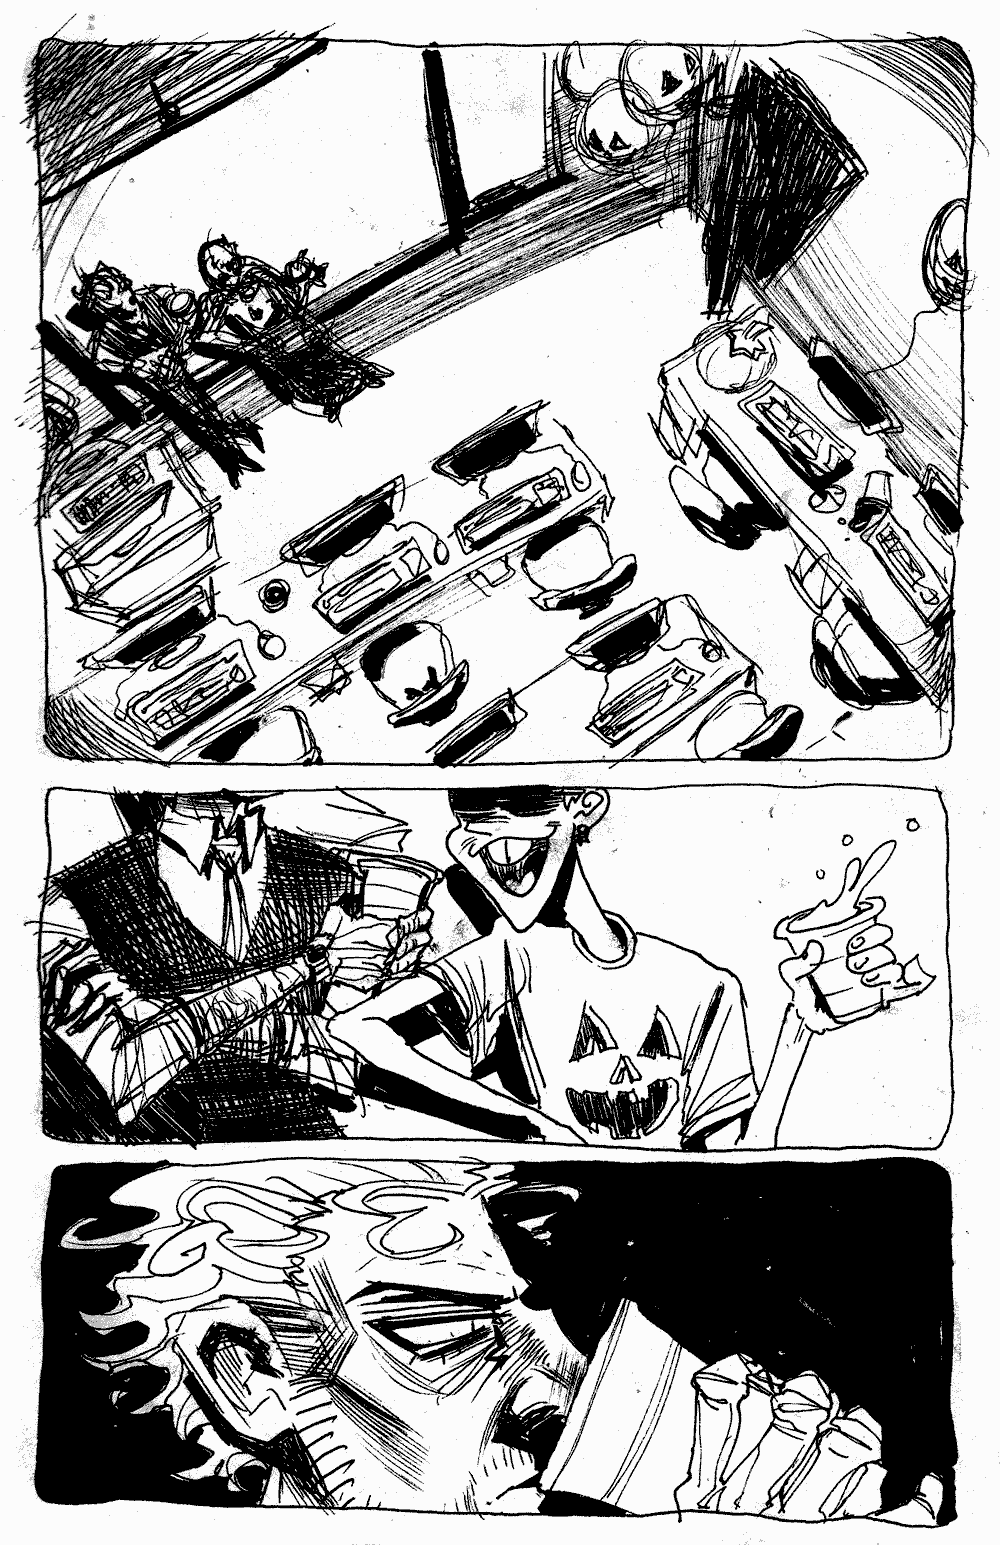 Page 1 - View from above of our main characters.  Smaller man smiles and nudges older man.  Older man drinks his booze grumpily.